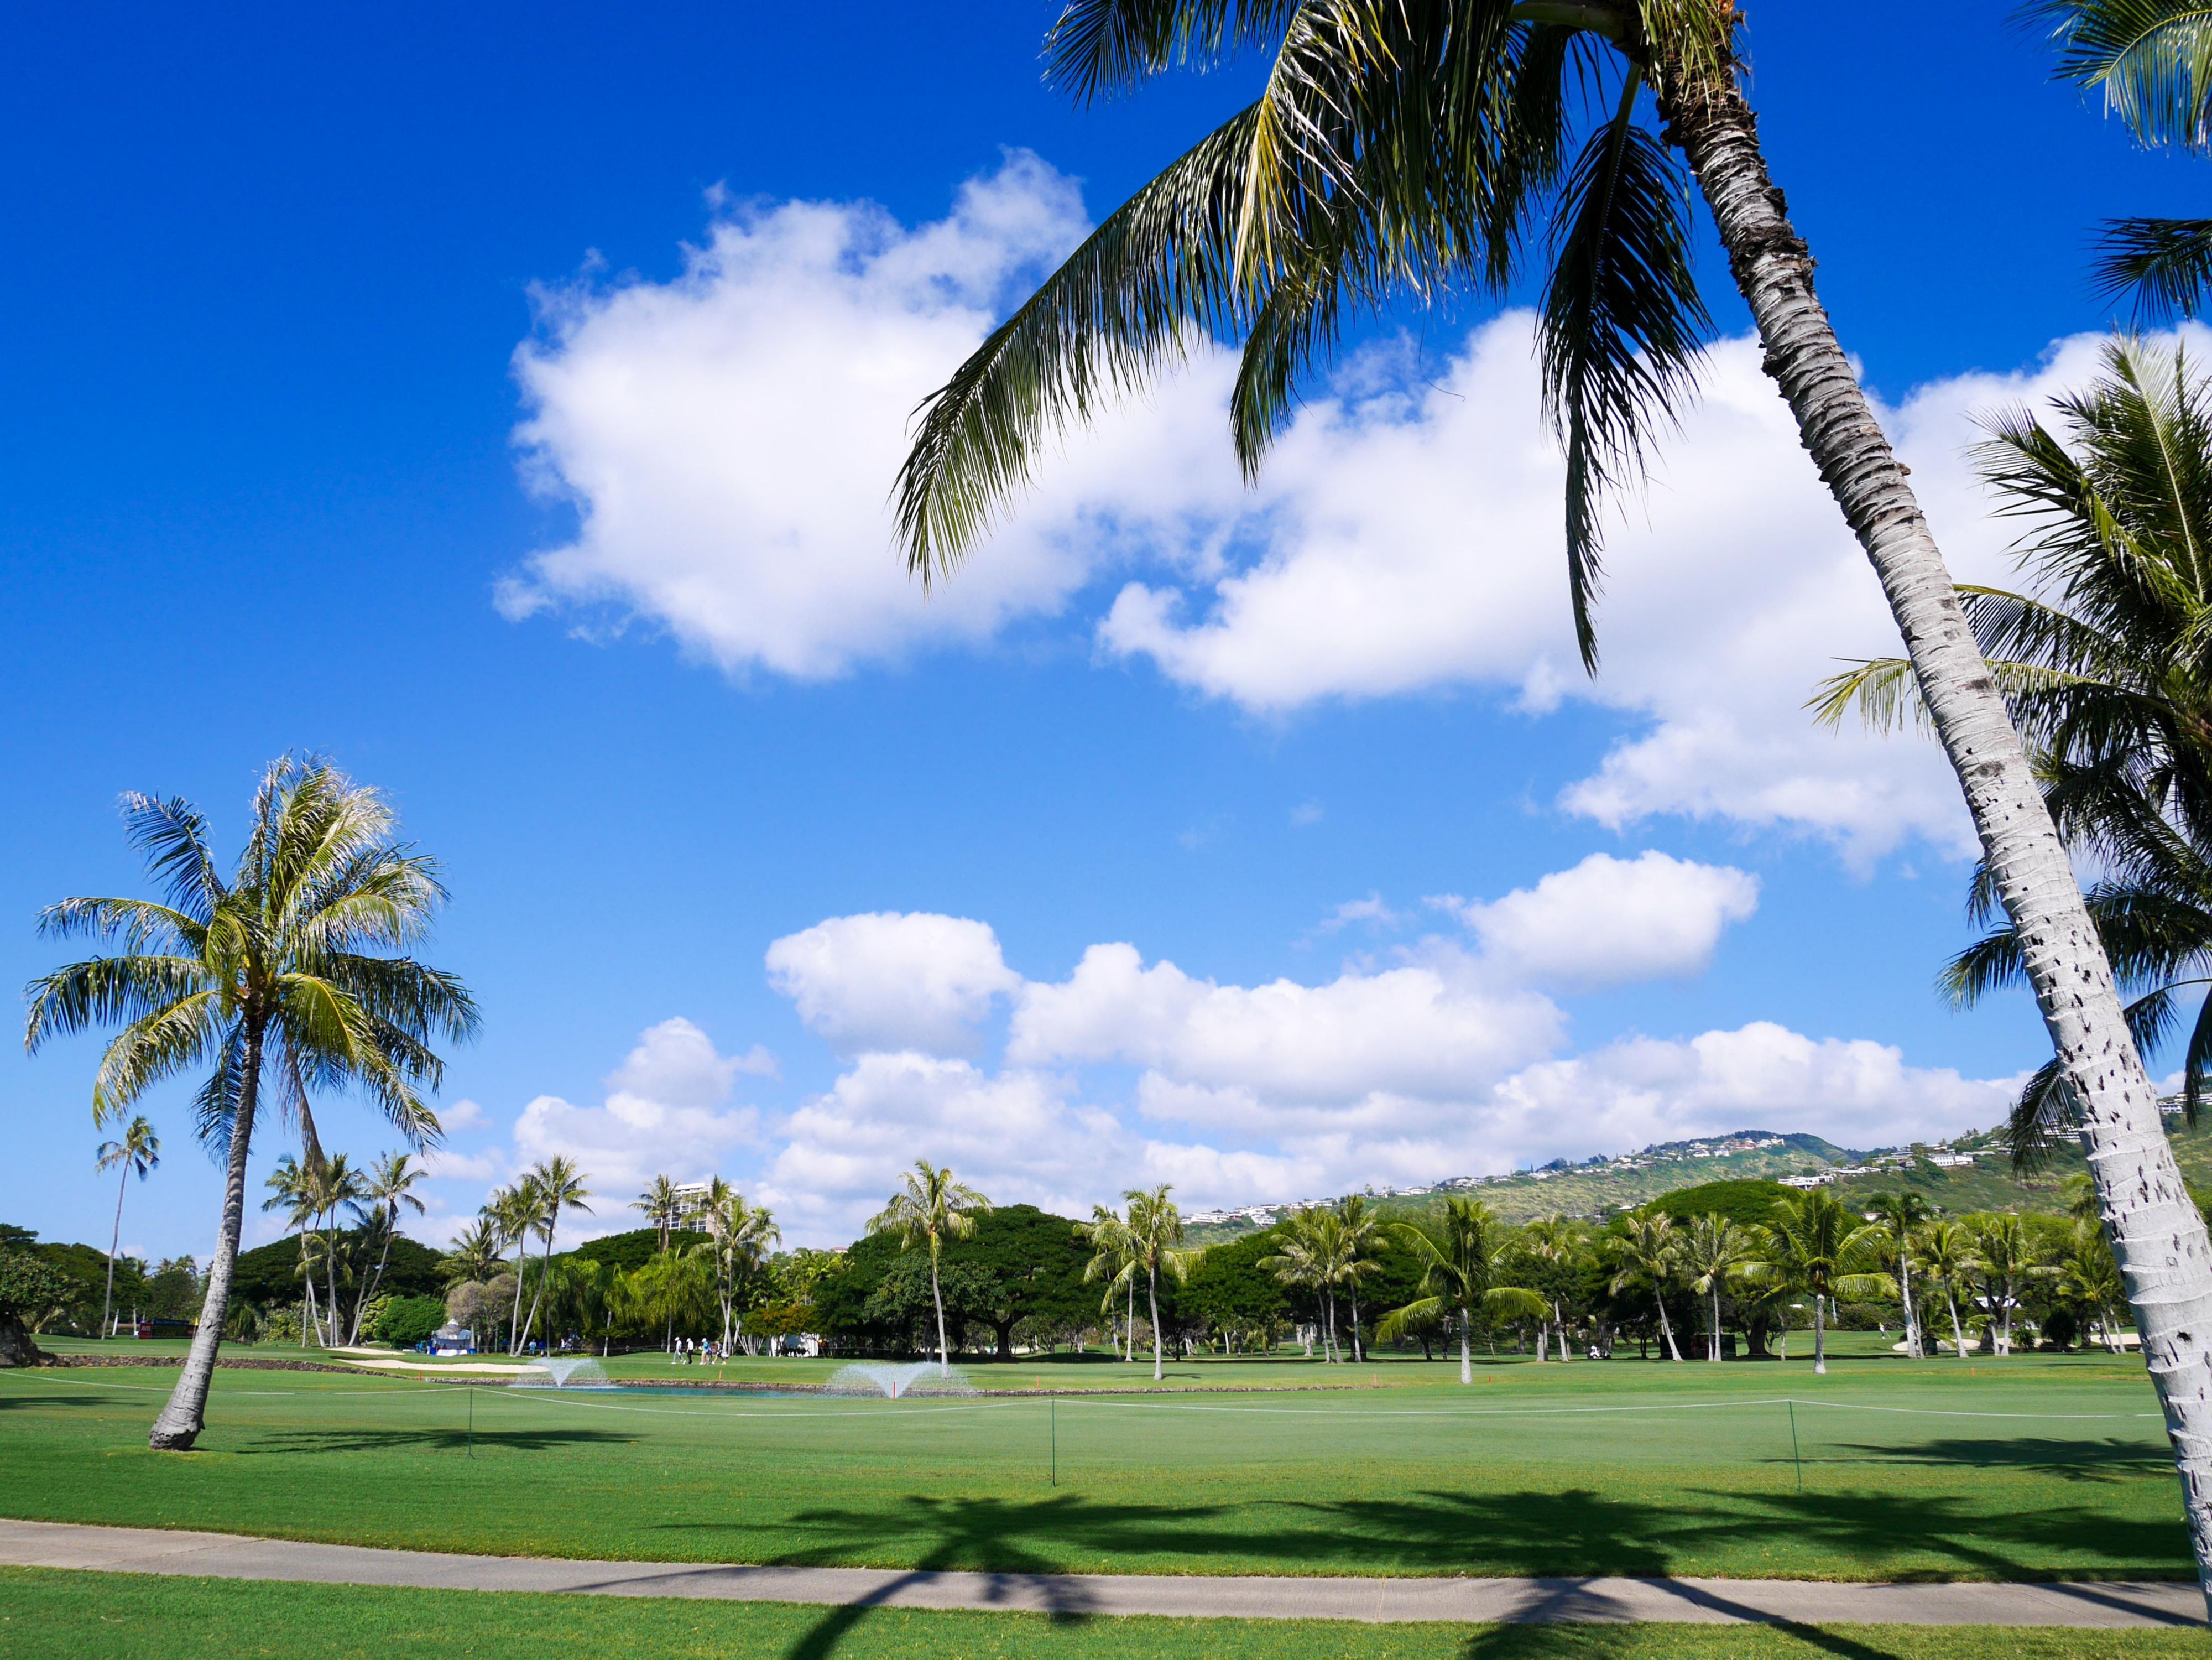 Enjoy one of the many golf courses on Oahu